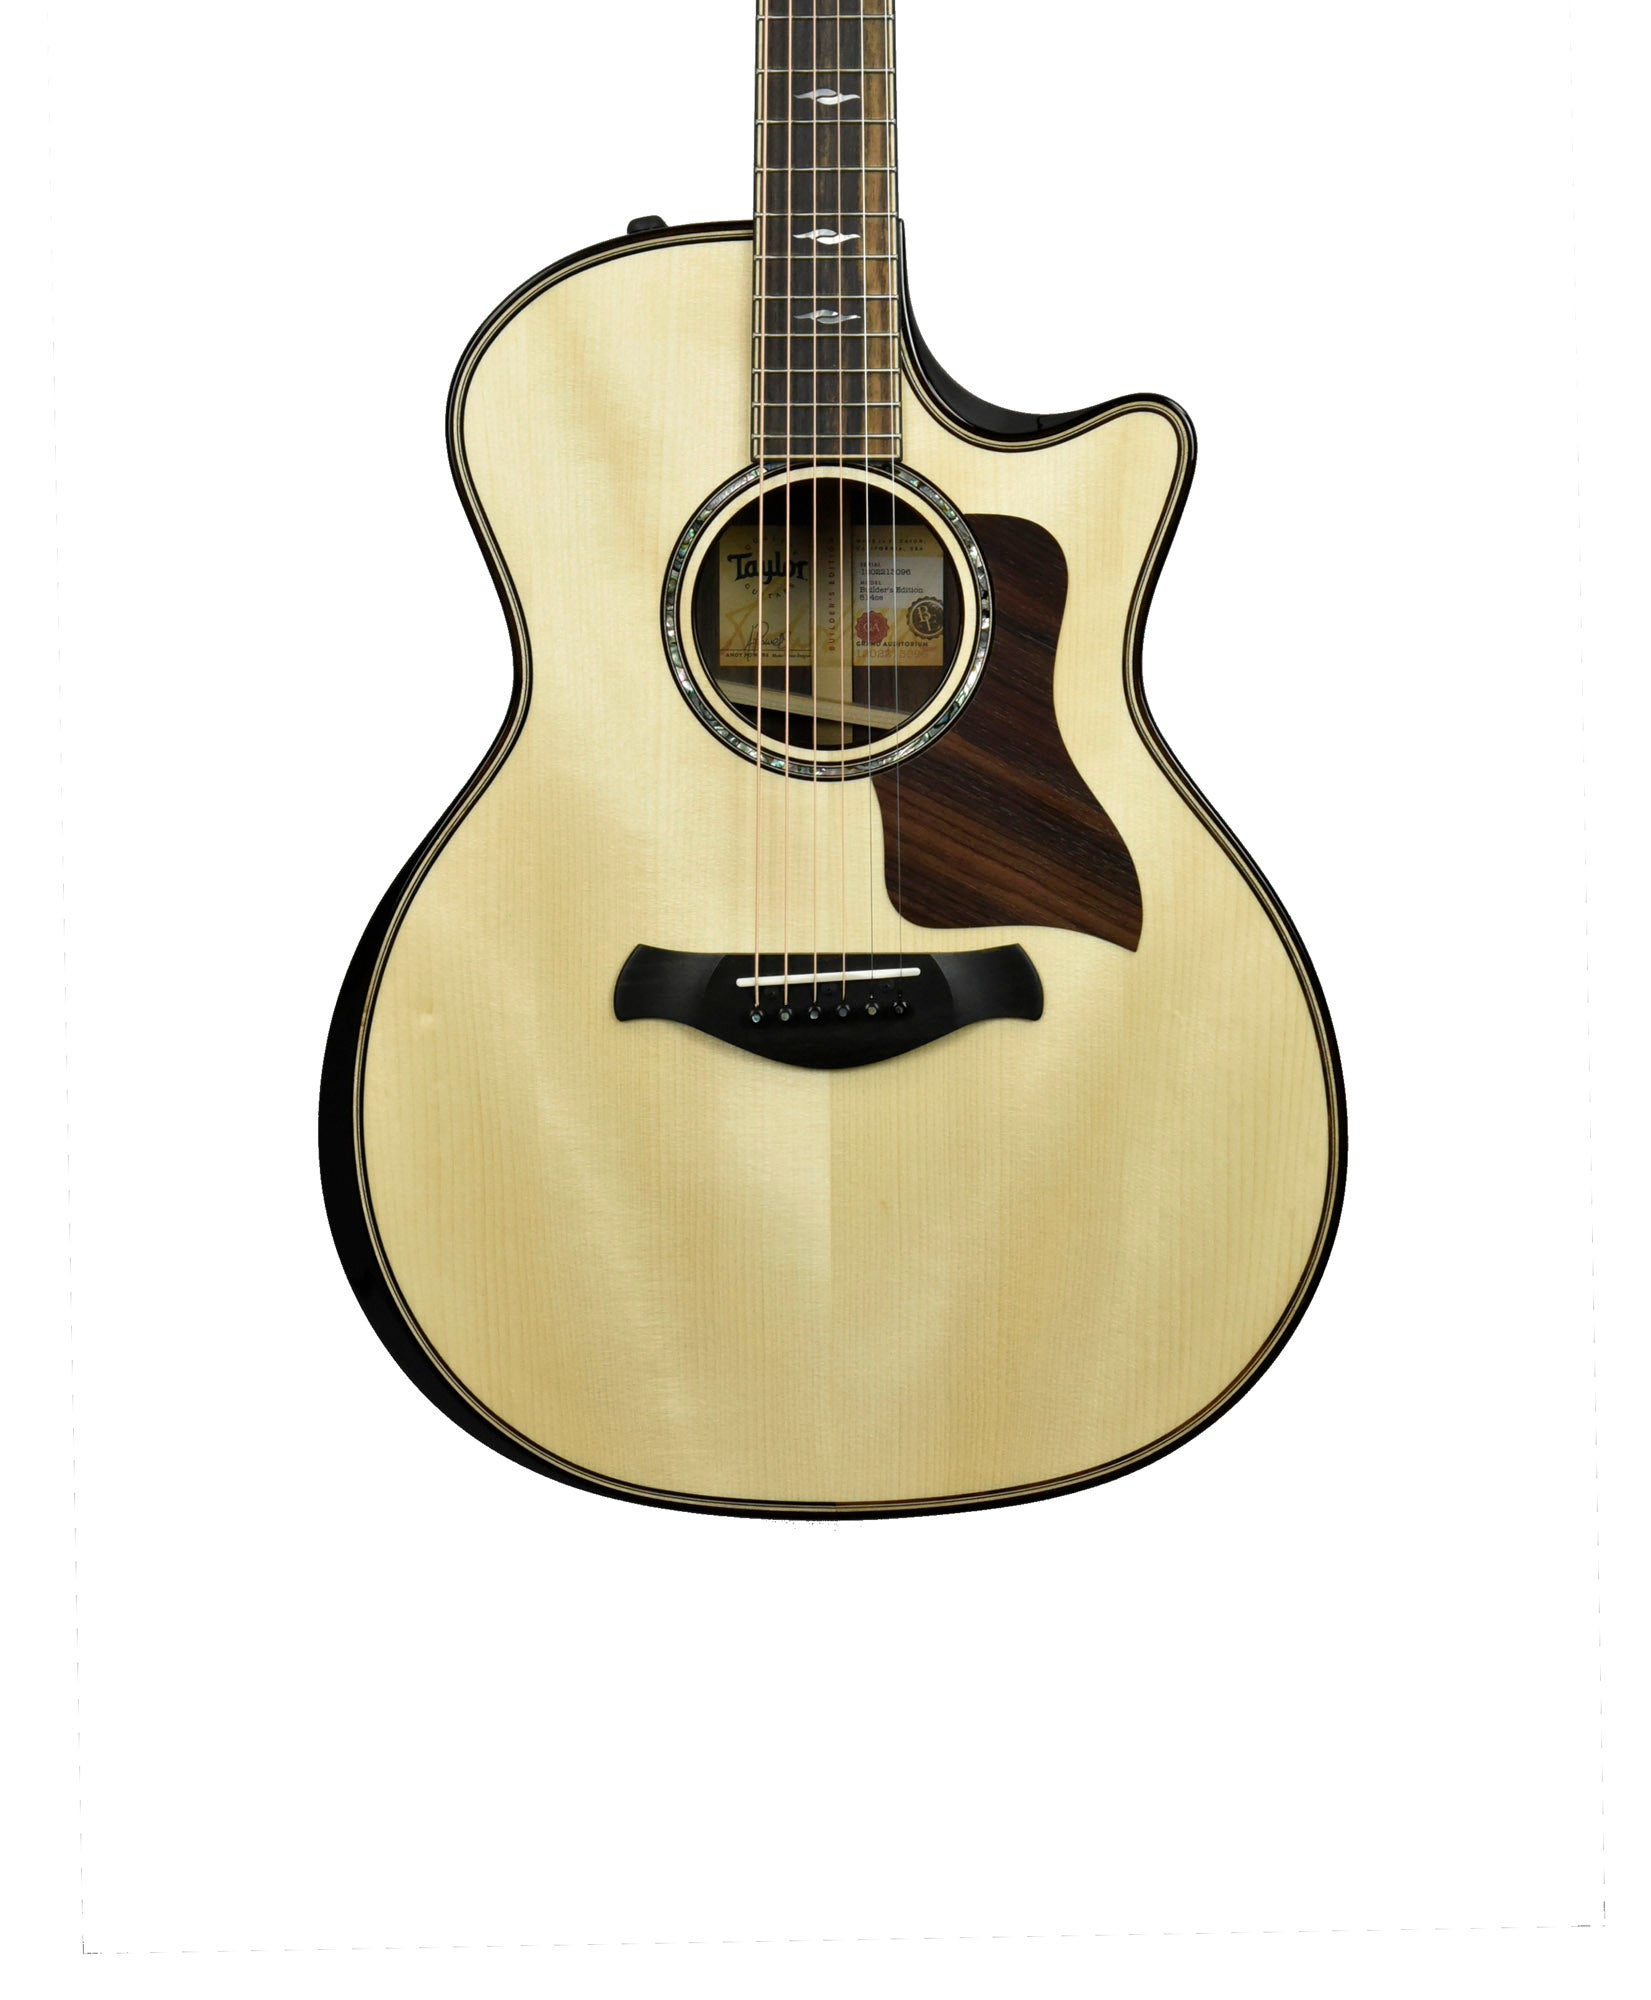 Taylor Builder's Edition 814ce Spruce/Rosewood Acoustic-Electric Guitar